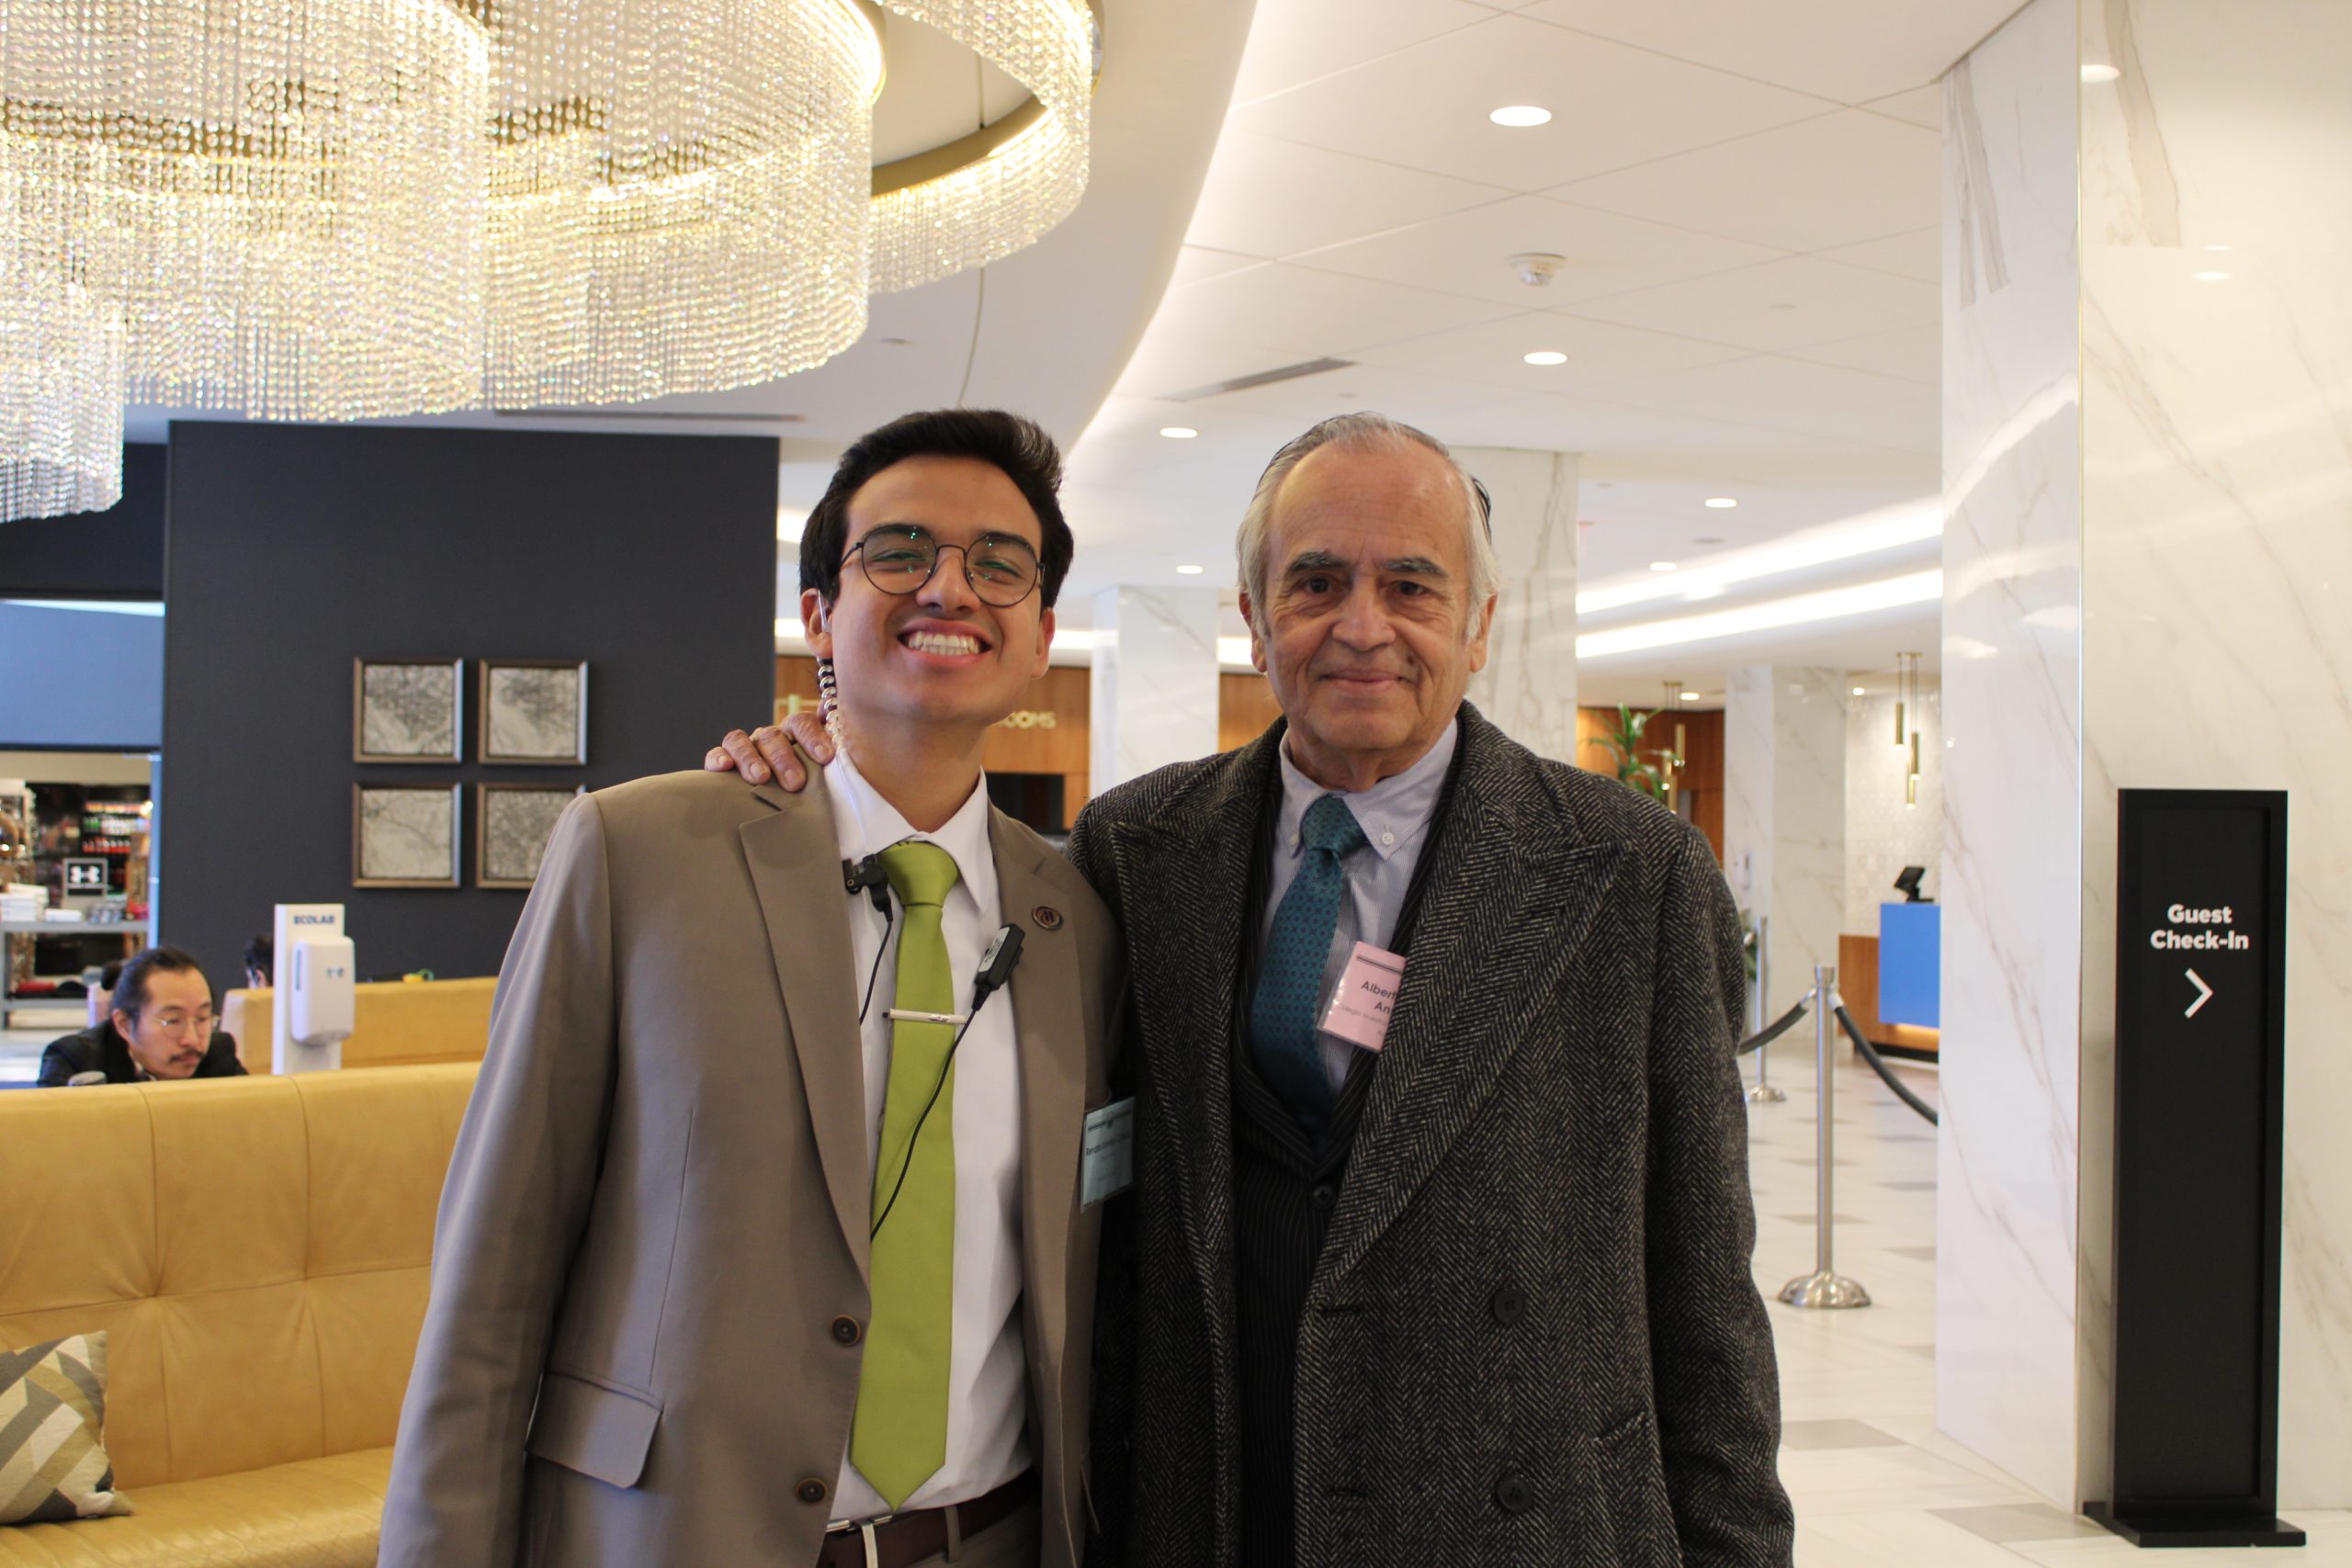 Students stands smiling with his former high school faculty advisor at a NAIMUN competition